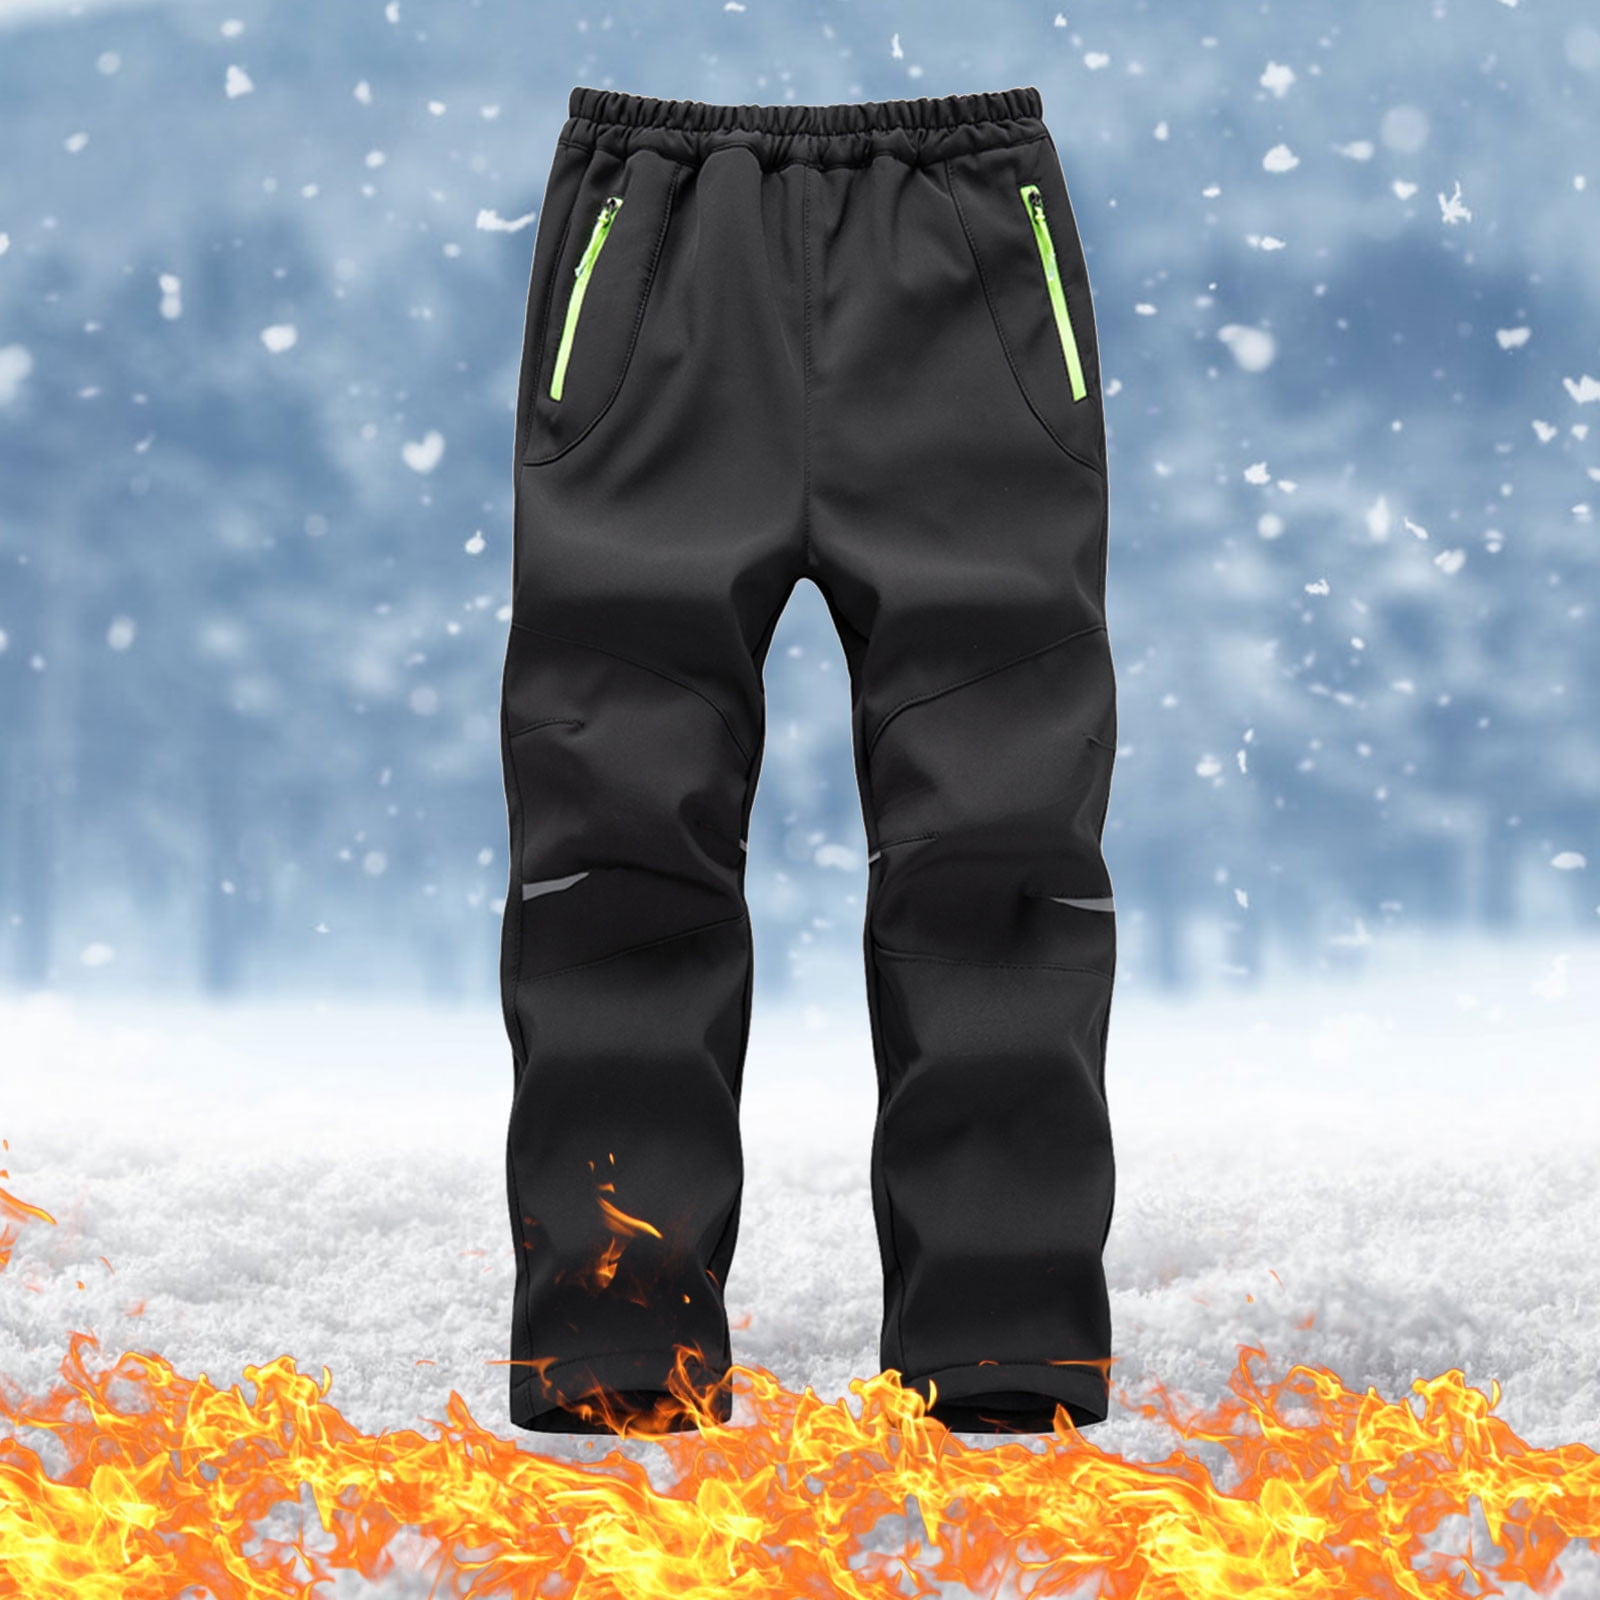 Sew Can Do: Make Your Own Snow Gear Part 1: DIY Snow Pants